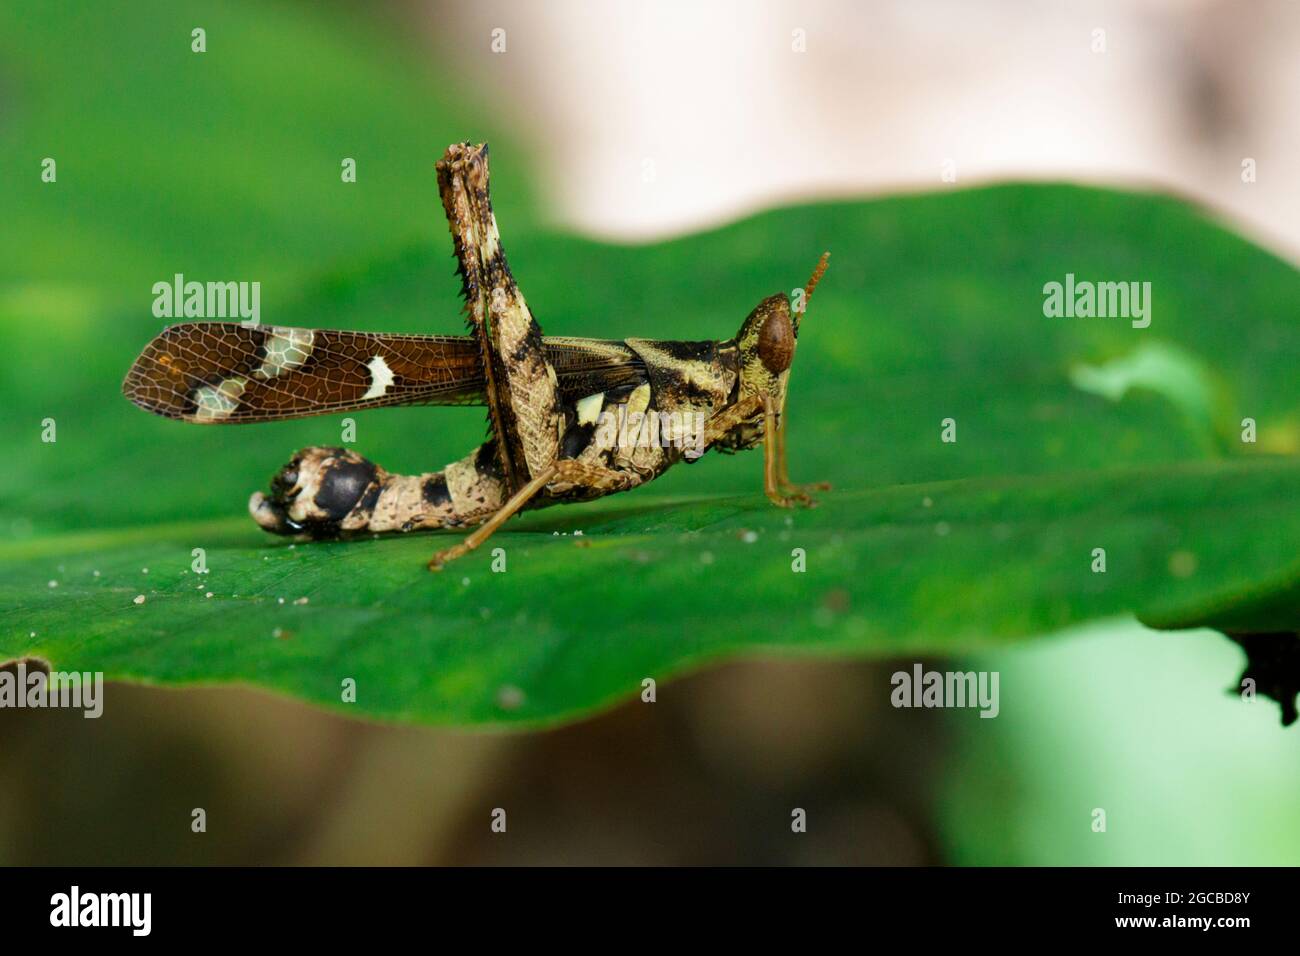 Image of Conjoined Spot Monkey-grasshopper (female), Erianthus serratus on green leaves. Insect Animal Stock Photo